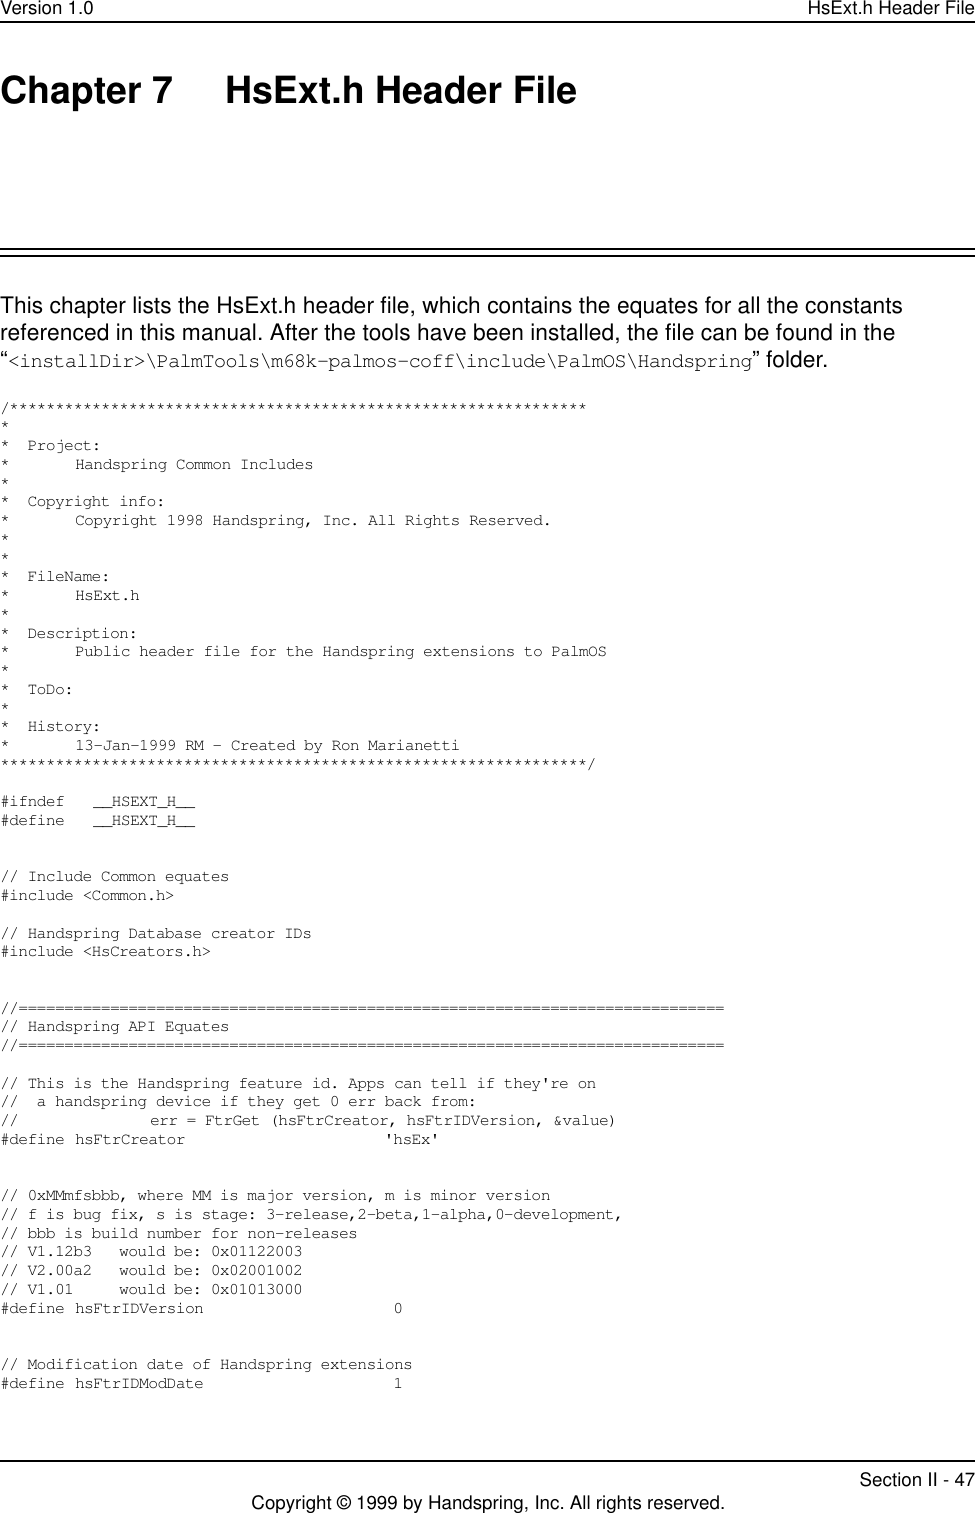 Version 1.0 HsExt.h Header FileSection II - 47Copyright © 1999 by Handspring, Inc. All rights reserved.Chapter 7 HsExt.h Header FileThis chapter lists the HsExt.h header file, which contains the equates for all the constants referenced in this manual. After the tools have been installed, the file can be found in the “&lt;installDir&gt;\PalmTools\m68k-palmos-coff\include\PalmOS\Handspring” folder./*****************************************************************  Project:* Handspring Common Includes**  Copyright info:* Copyright 1998 Handspring, Inc. All Rights Reserved.   ***  FileName:* HsExt.h* *  Description:* Public header file for the Handspring extensions to PalmOS**  ToDo:* *  History:* 13-Jan-1999 RM - Created by Ron Marianetti****************************************************************/#ifndef   __HSEXT_H__#define   __HSEXT_H__// Include Common equates#include &lt;Common.h&gt;// Handspring Database creator IDs#include &lt;HsCreators.h&gt;//=============================================================================// Handspring API Equates//=============================================================================// This is the Handspring feature id. Apps can tell if they&apos;re on//  a handspring device if they get 0 err back from: // err = FtrGet (hsFtrCreator, hsFtrIDVersion, &amp;value)#define hsFtrCreator  &apos;hsEx&apos;// 0xMMmfsbbb, where MM is major version, m is minor version// f is bug fix, s is stage: 3-release,2-beta,1-alpha,0-development,// bbb is build number for non-releases // V1.12b3   would be: 0x01122003// V2.00a2   would be: 0x02001002// V1.01     would be: 0x01013000#define hsFtrIDVersion   0  // Modification date of Handspring extensions#define hsFtrIDModDate   1  